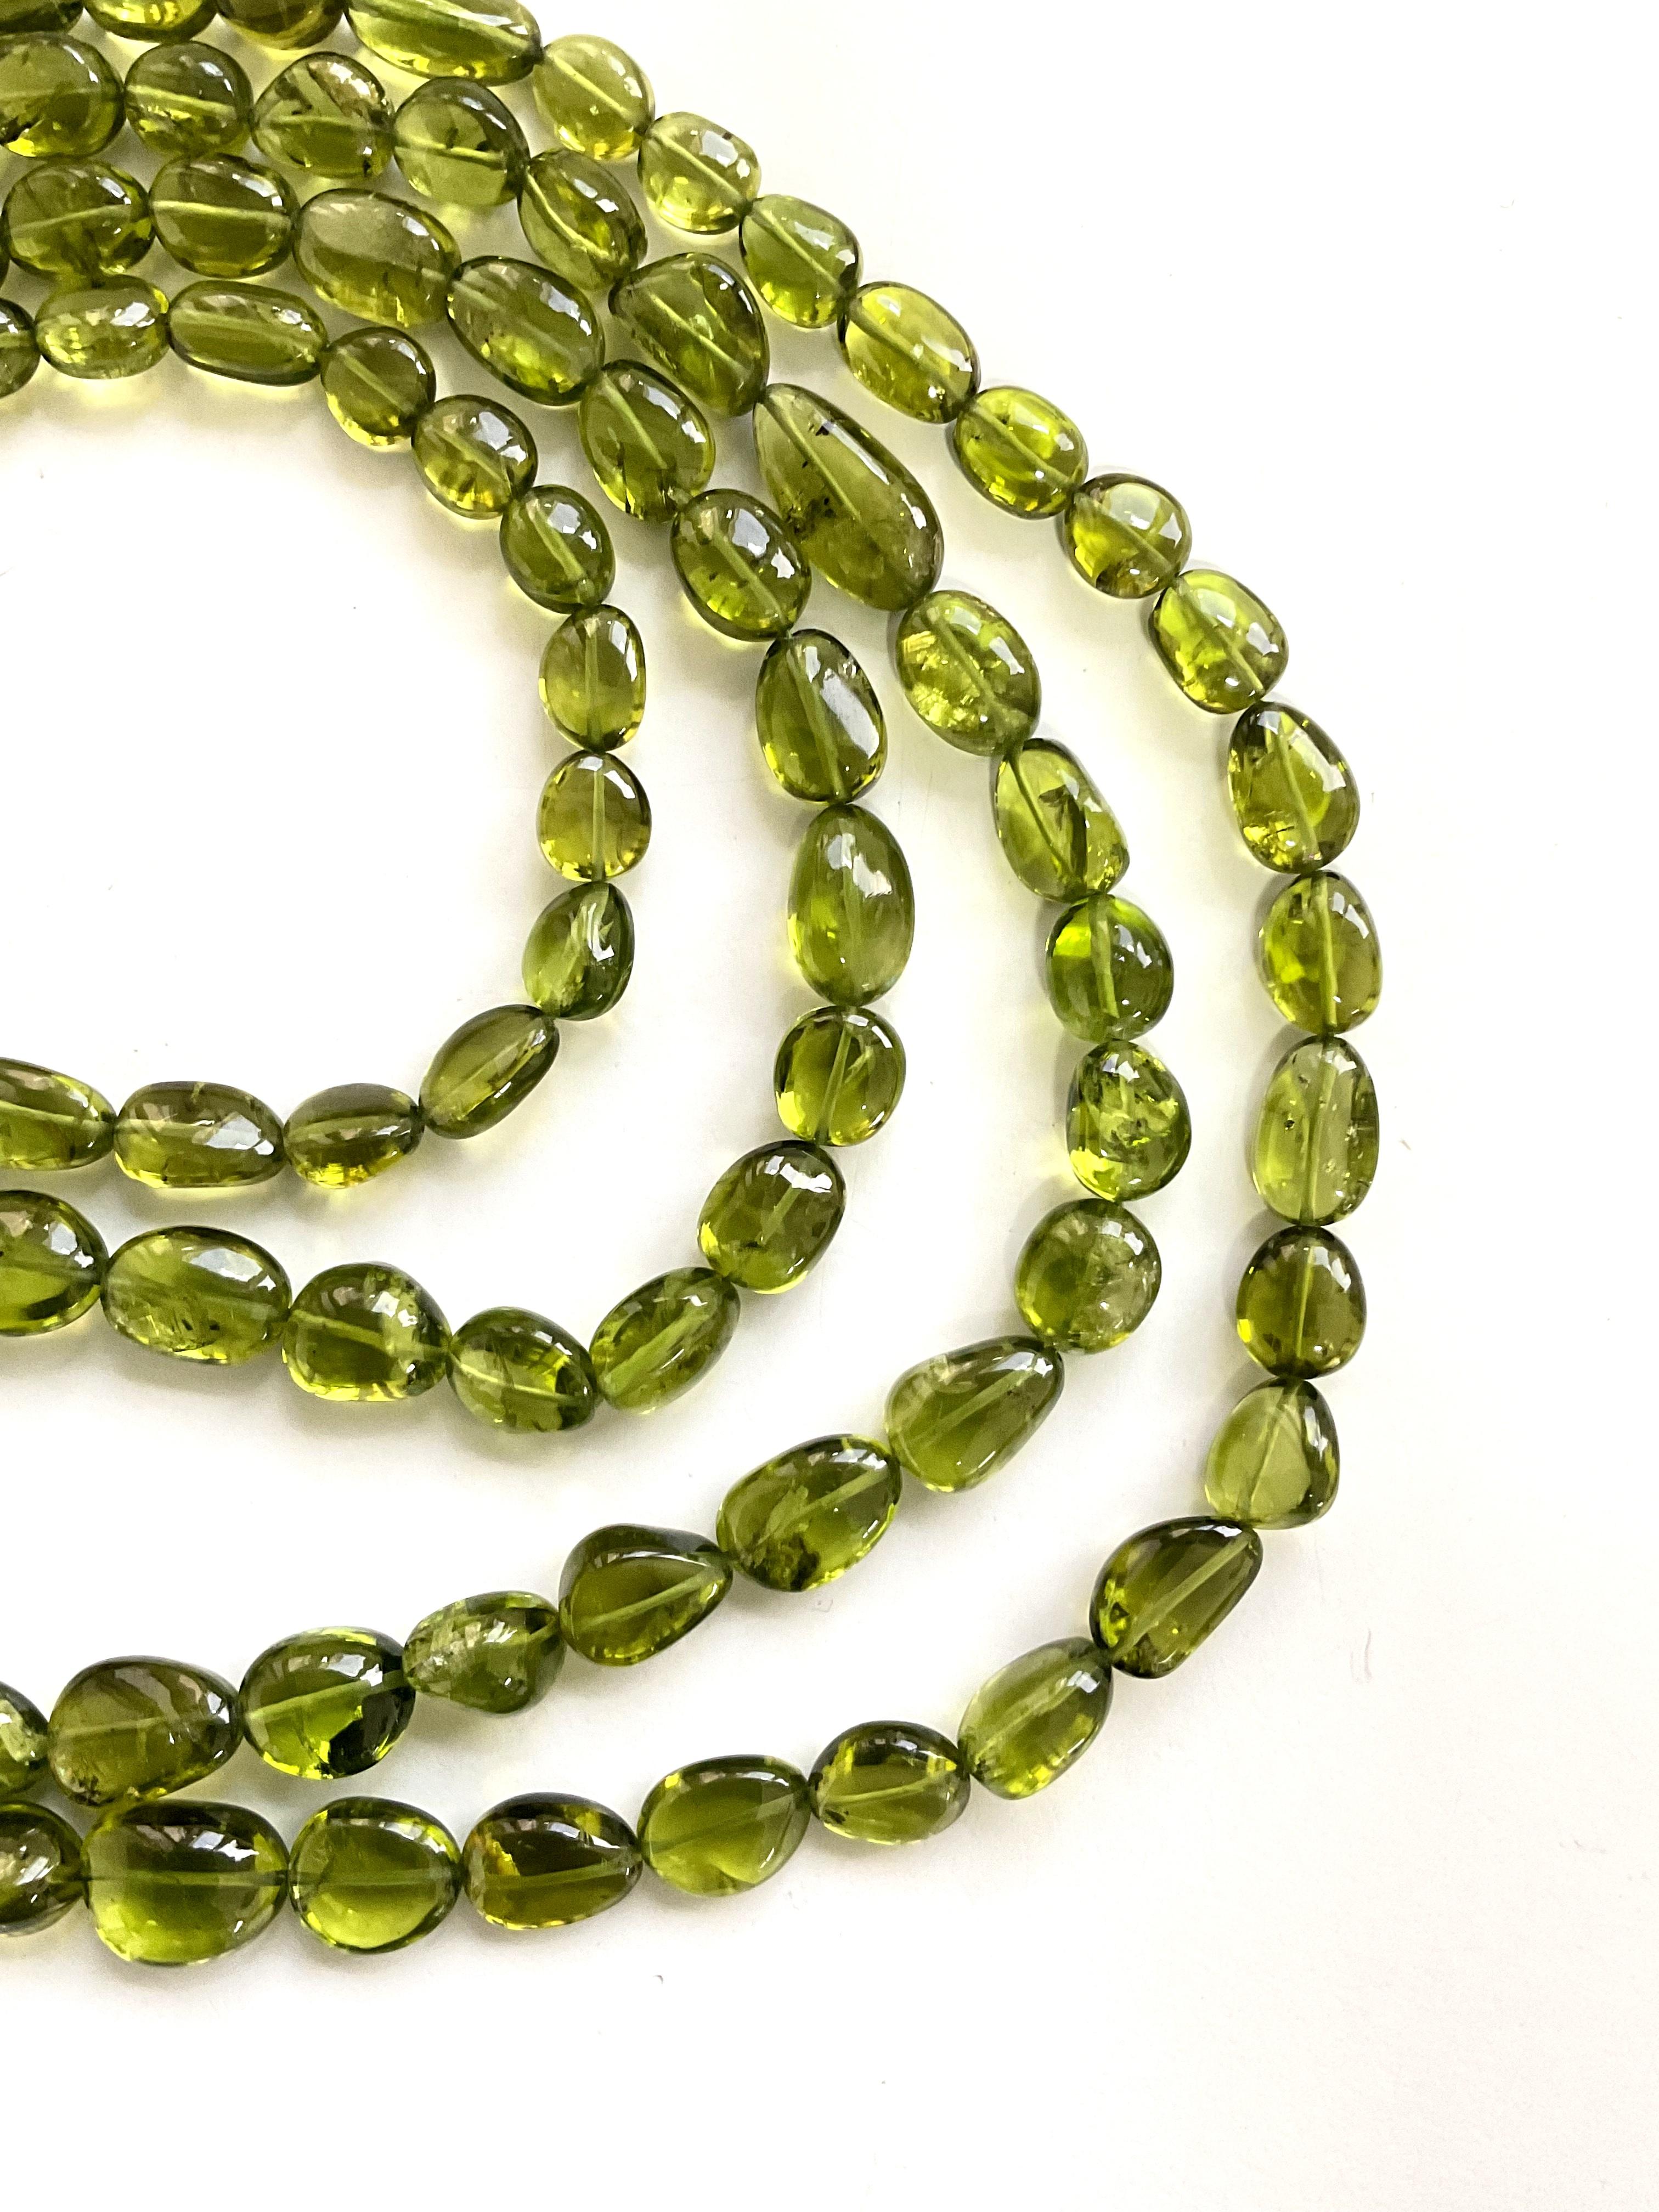 Top Quality 387.70 Carats Peridot Plain Tumbled Natural Gemstone Necklace For Sale 4